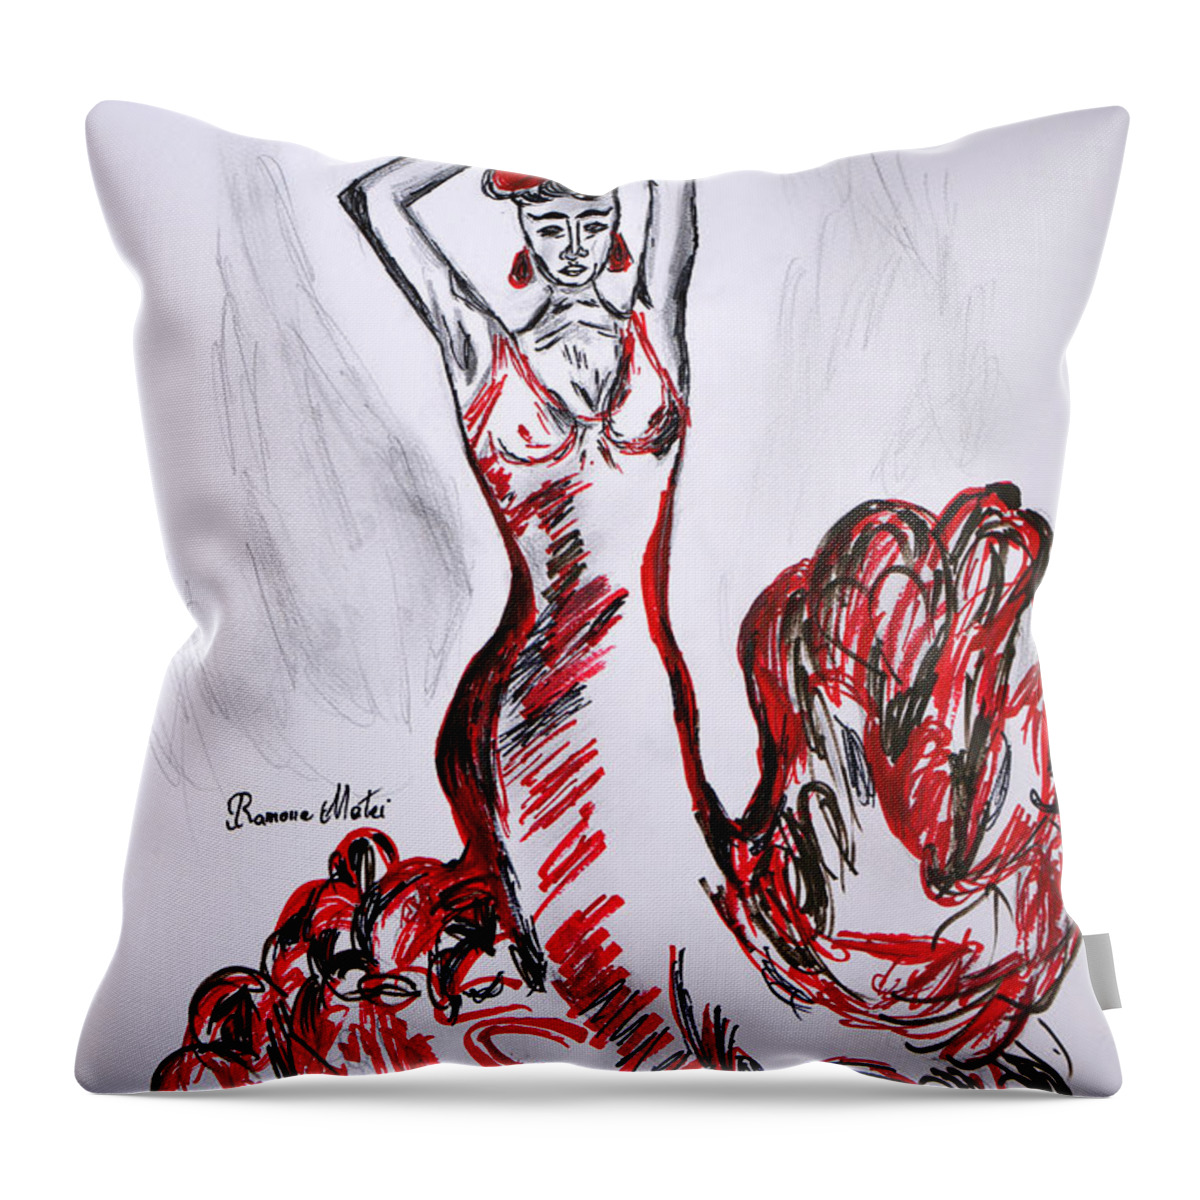 Flamenco Throw Pillow featuring the drawing Red Flamenco by Ramona Matei